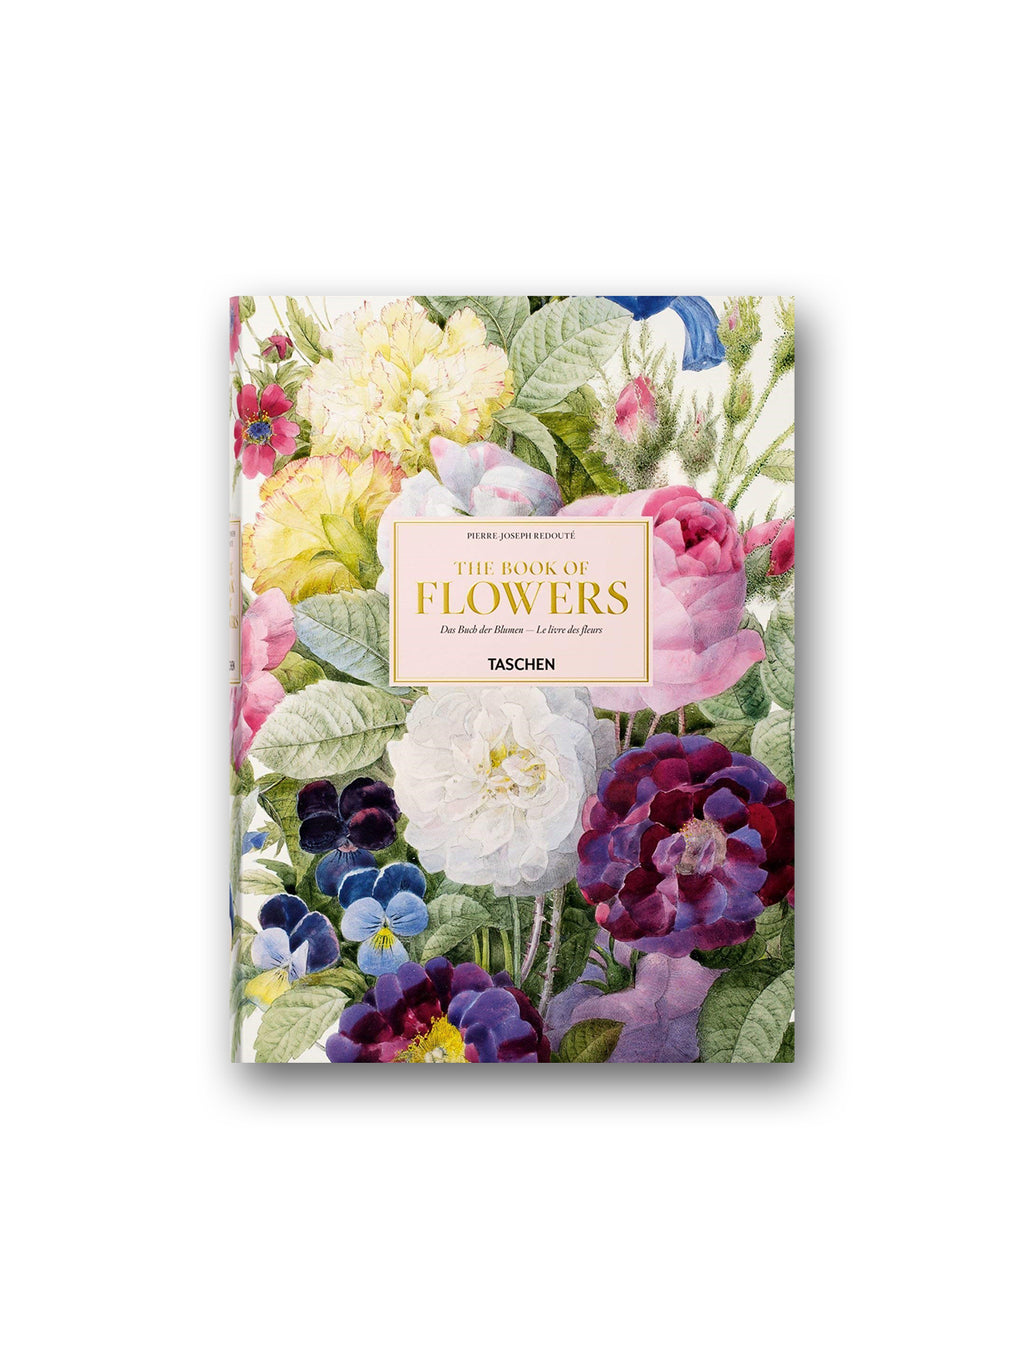 Redoute - The Book of Flowers